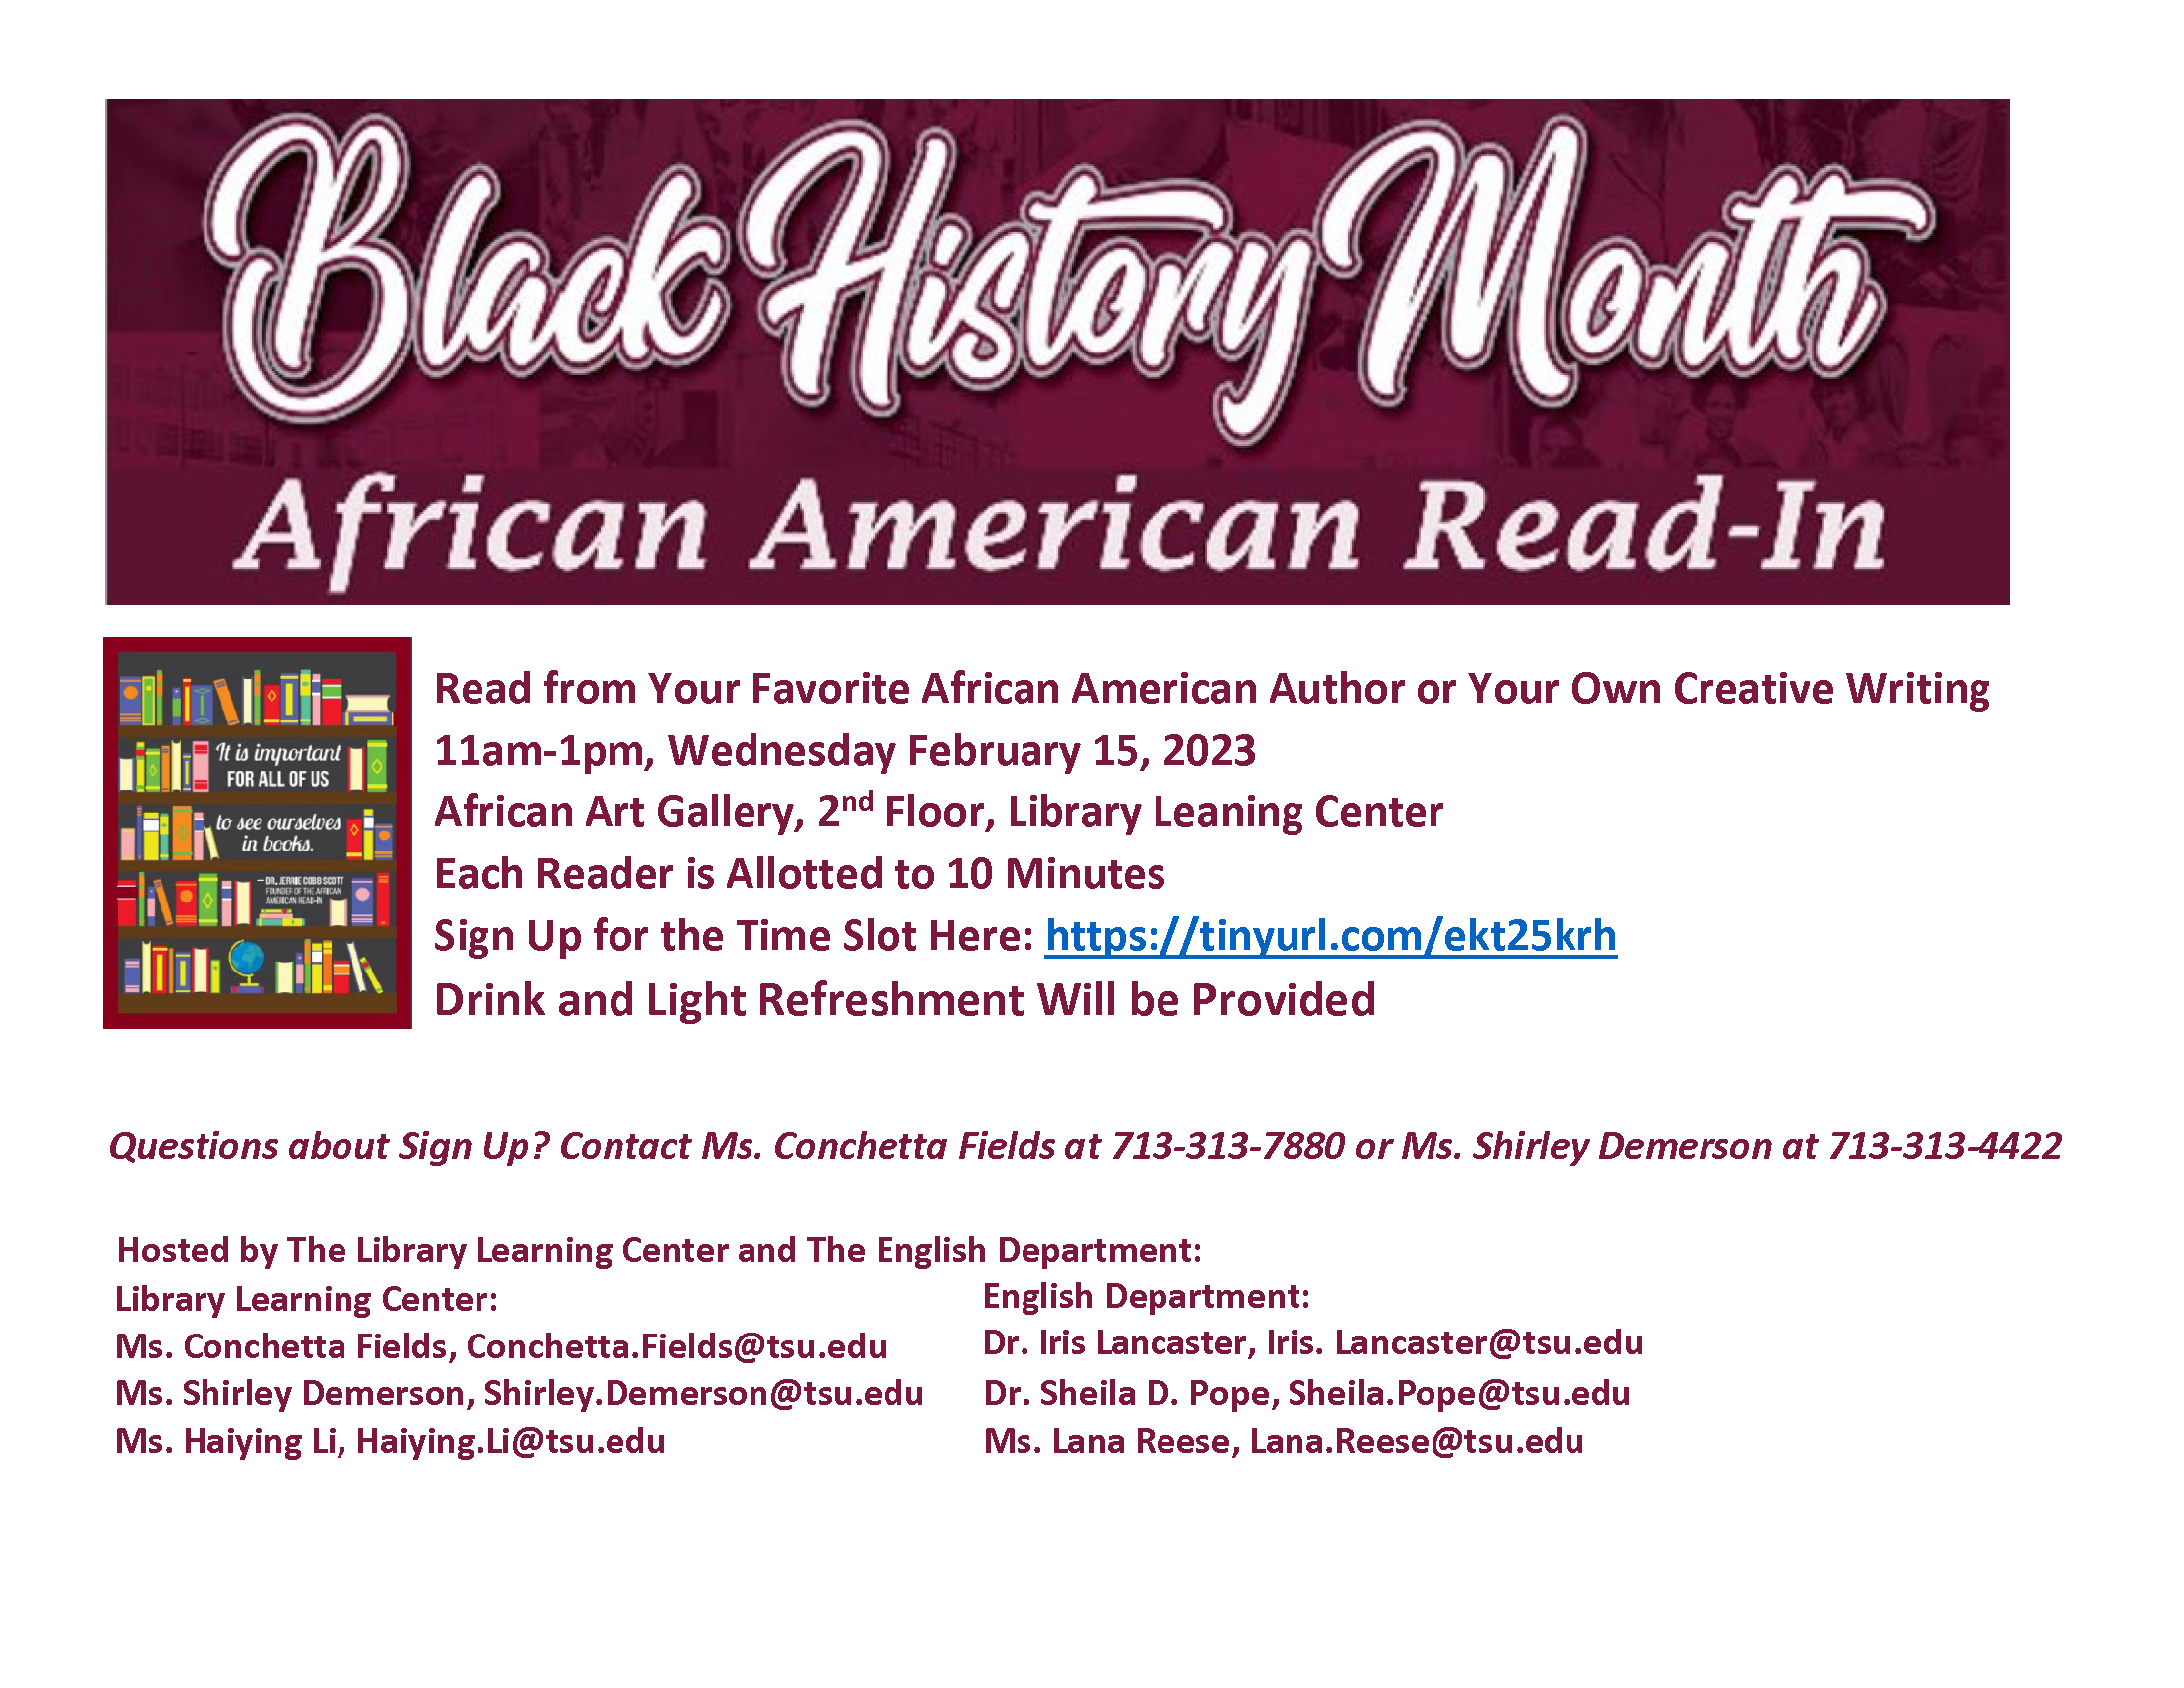 2023-african-american-read-in-poster